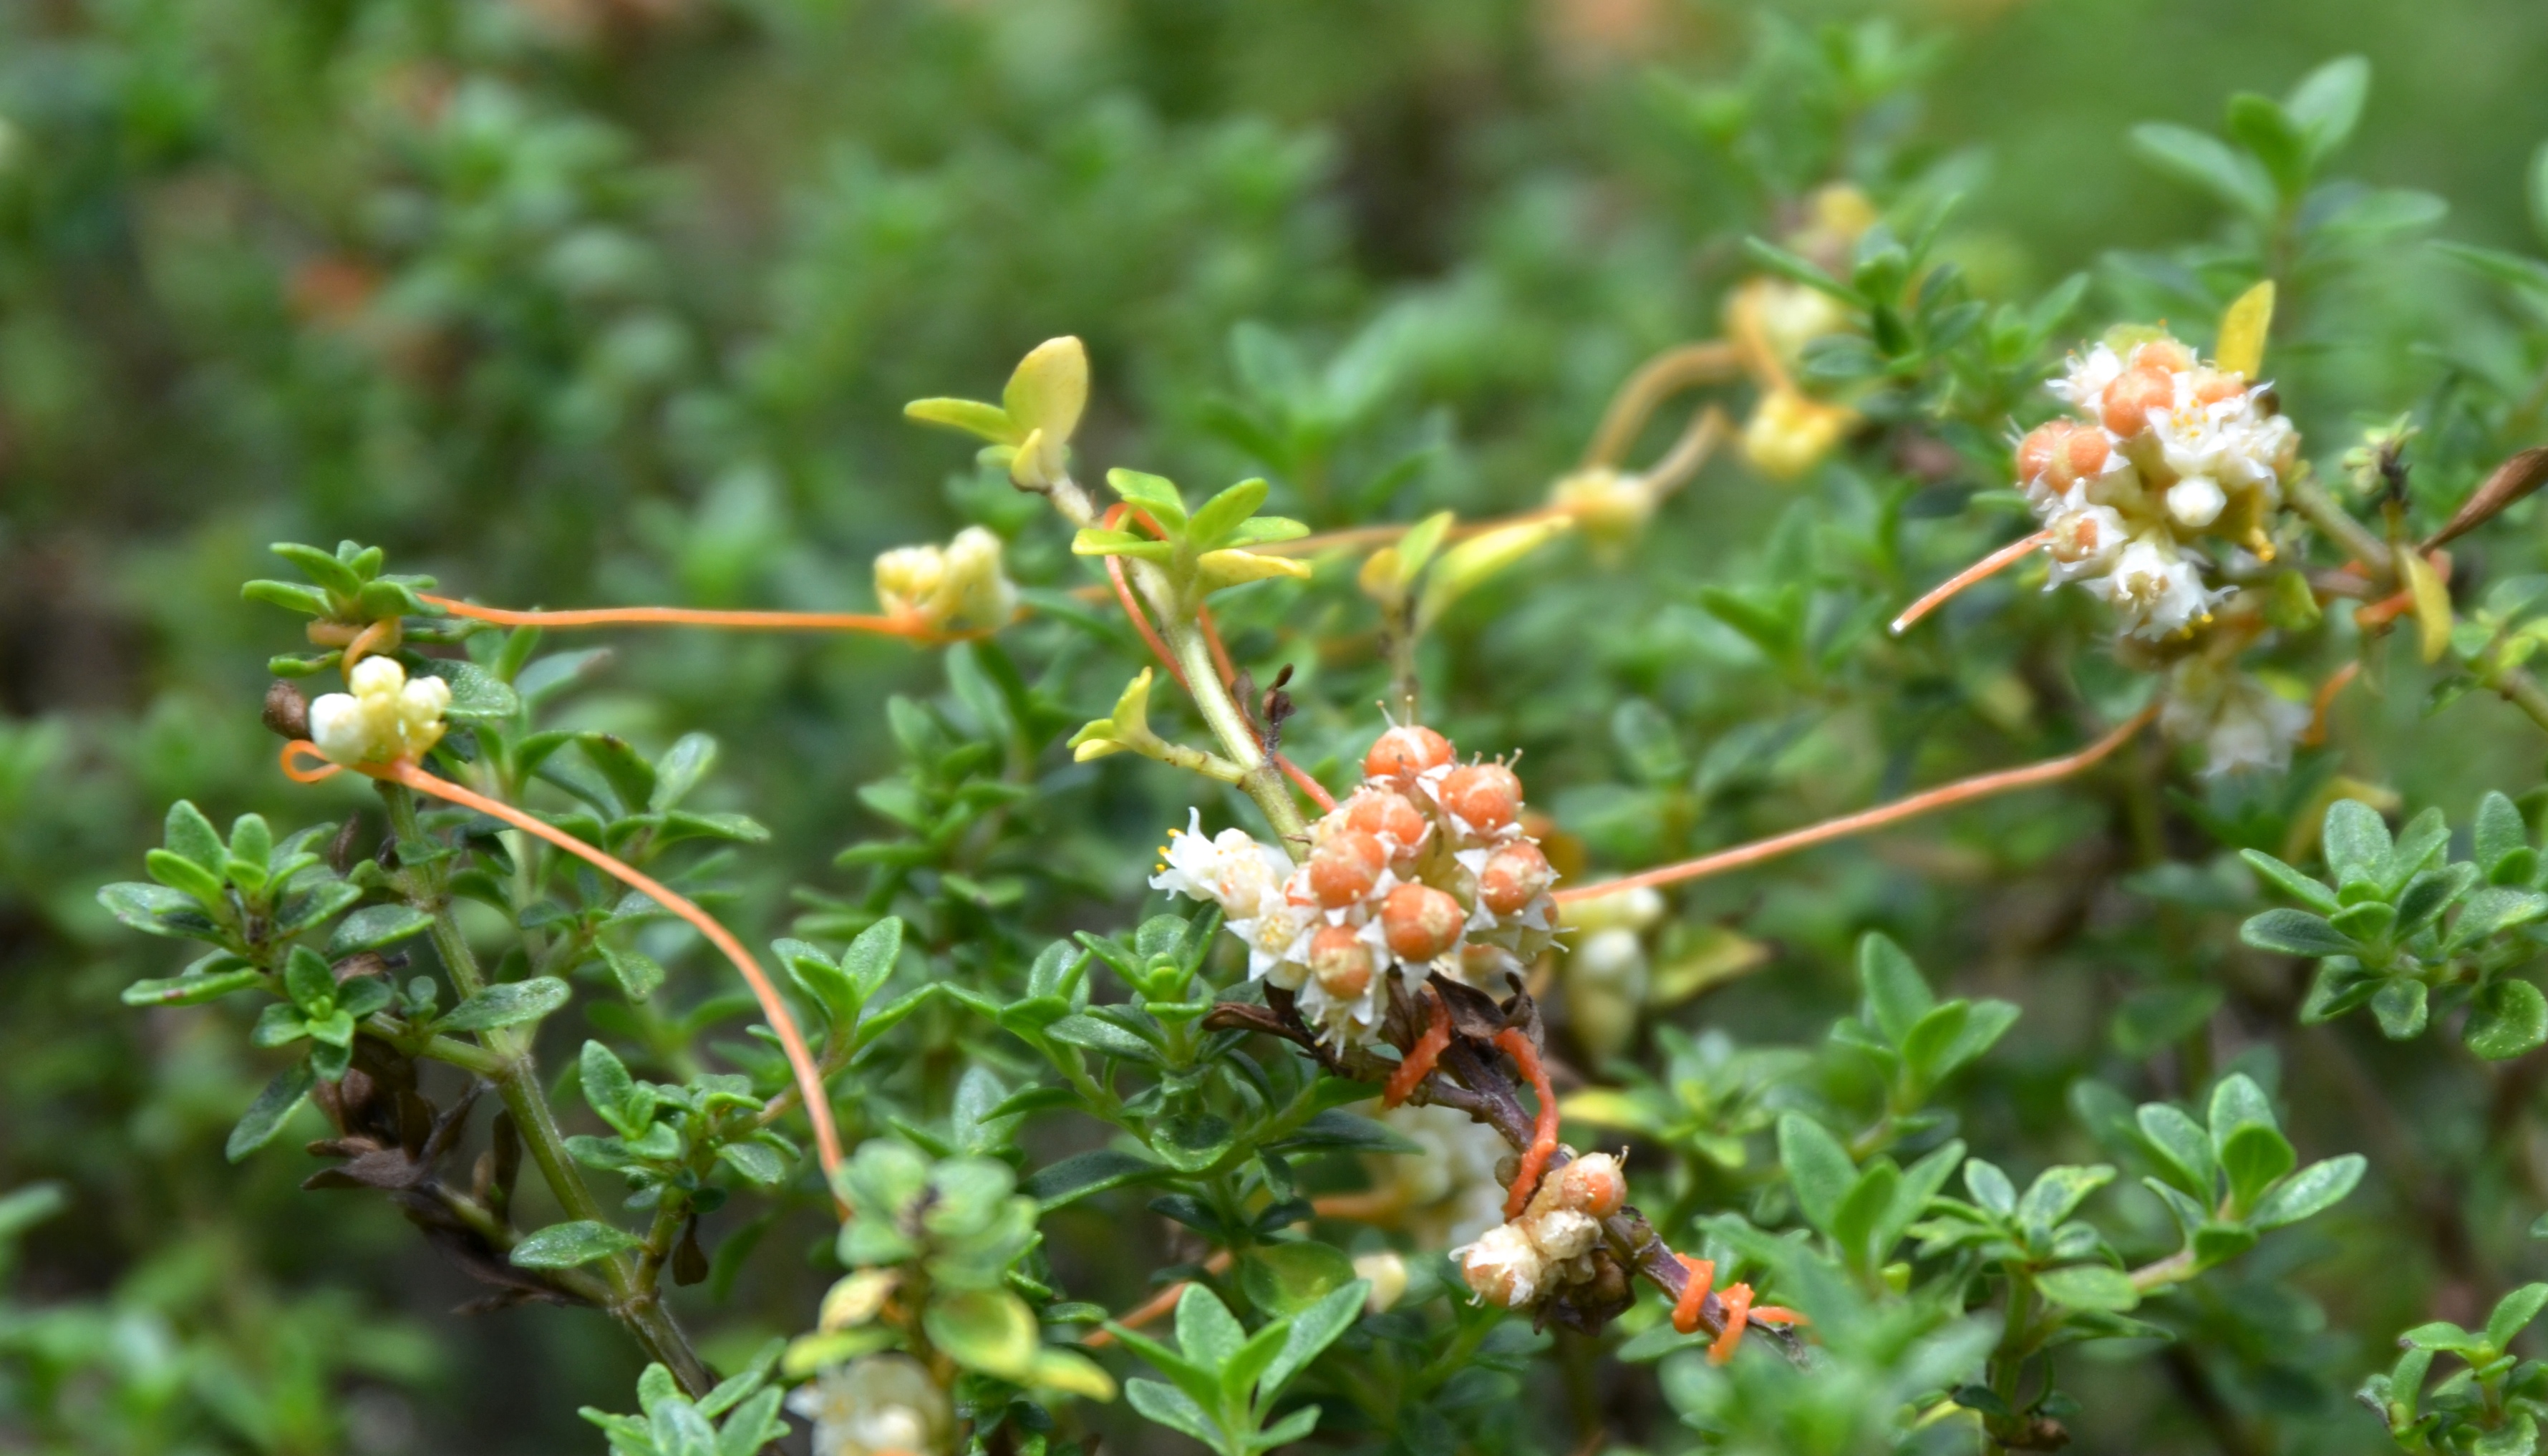 Thyme Dodder punctures the thyme plant - its unwilling host. Using an attachment structure called a haustoria it taps into the thyme stem and extracts water and nutrients. 